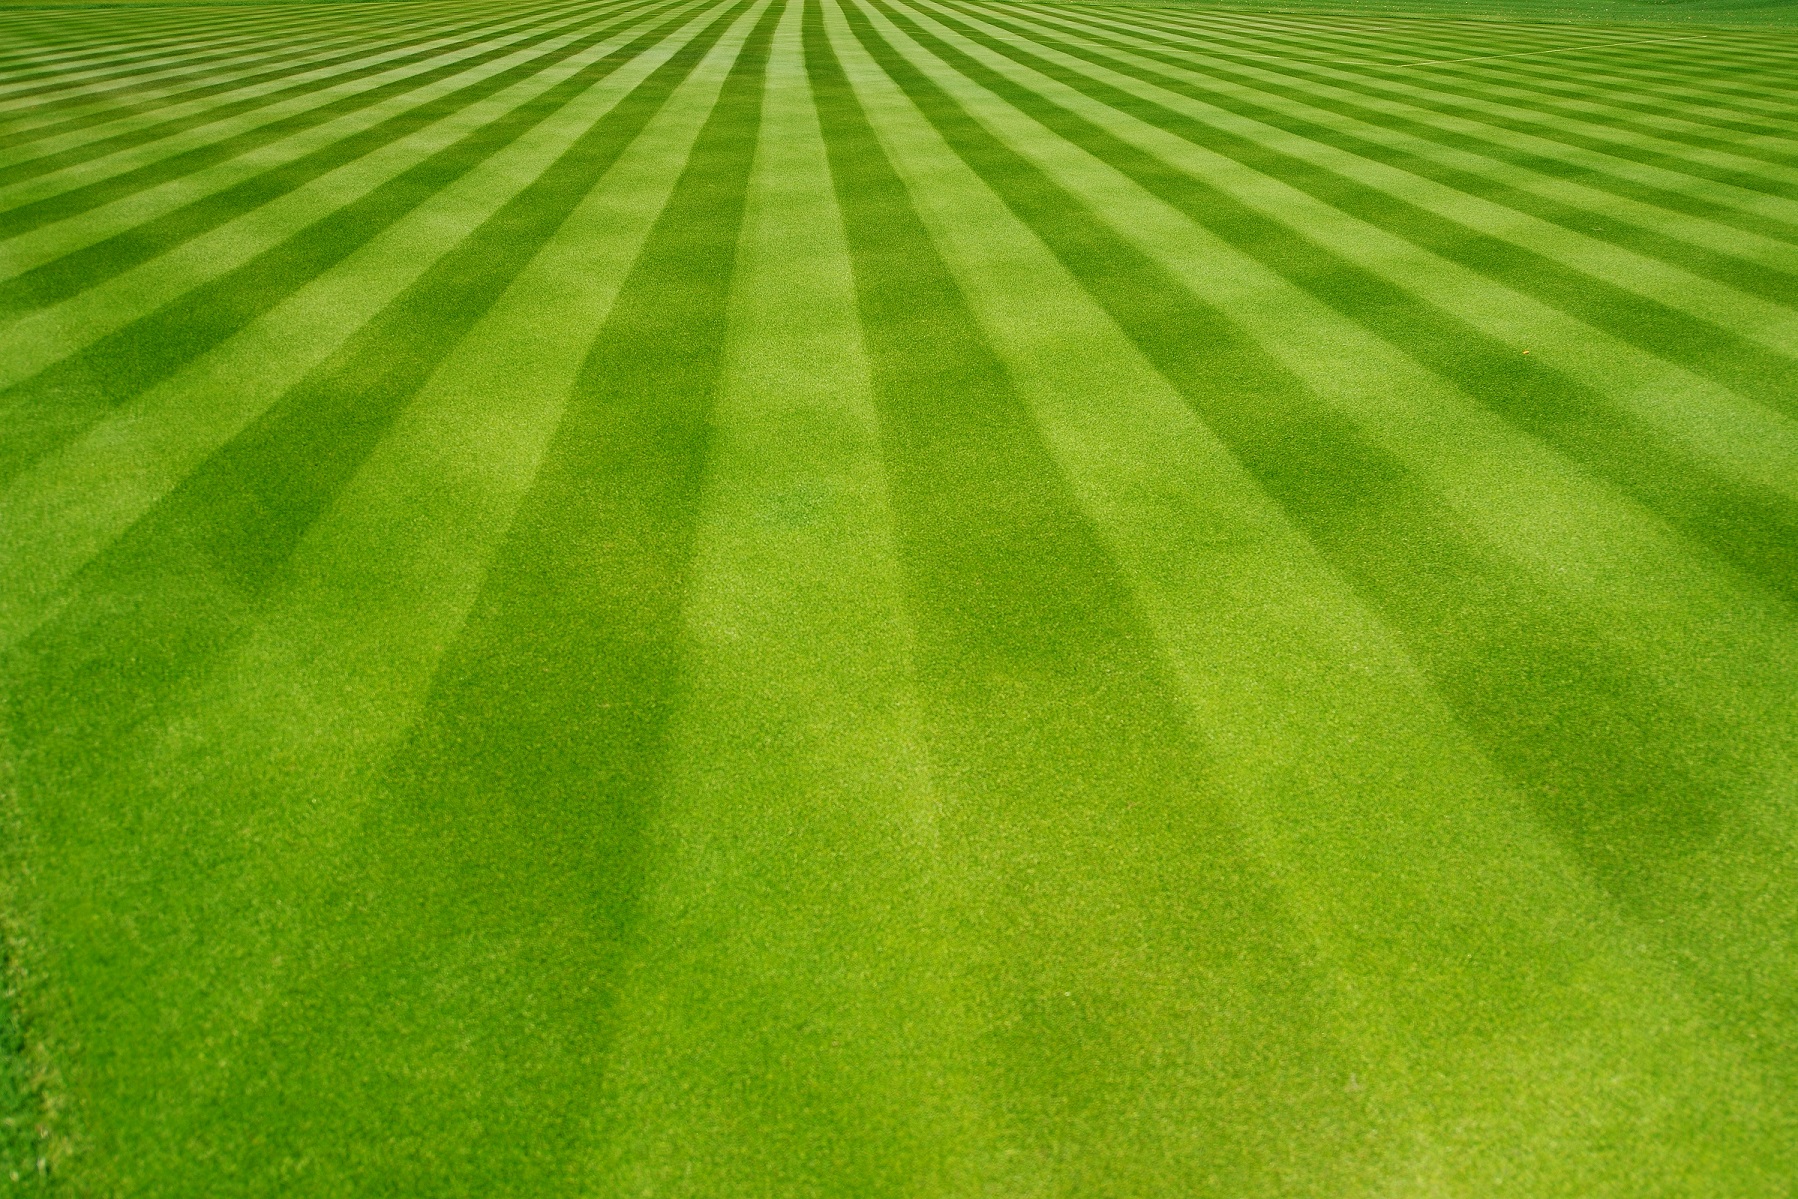 Perfectly striped freshly mowed garden lawn | LandMaster Outdoor Services